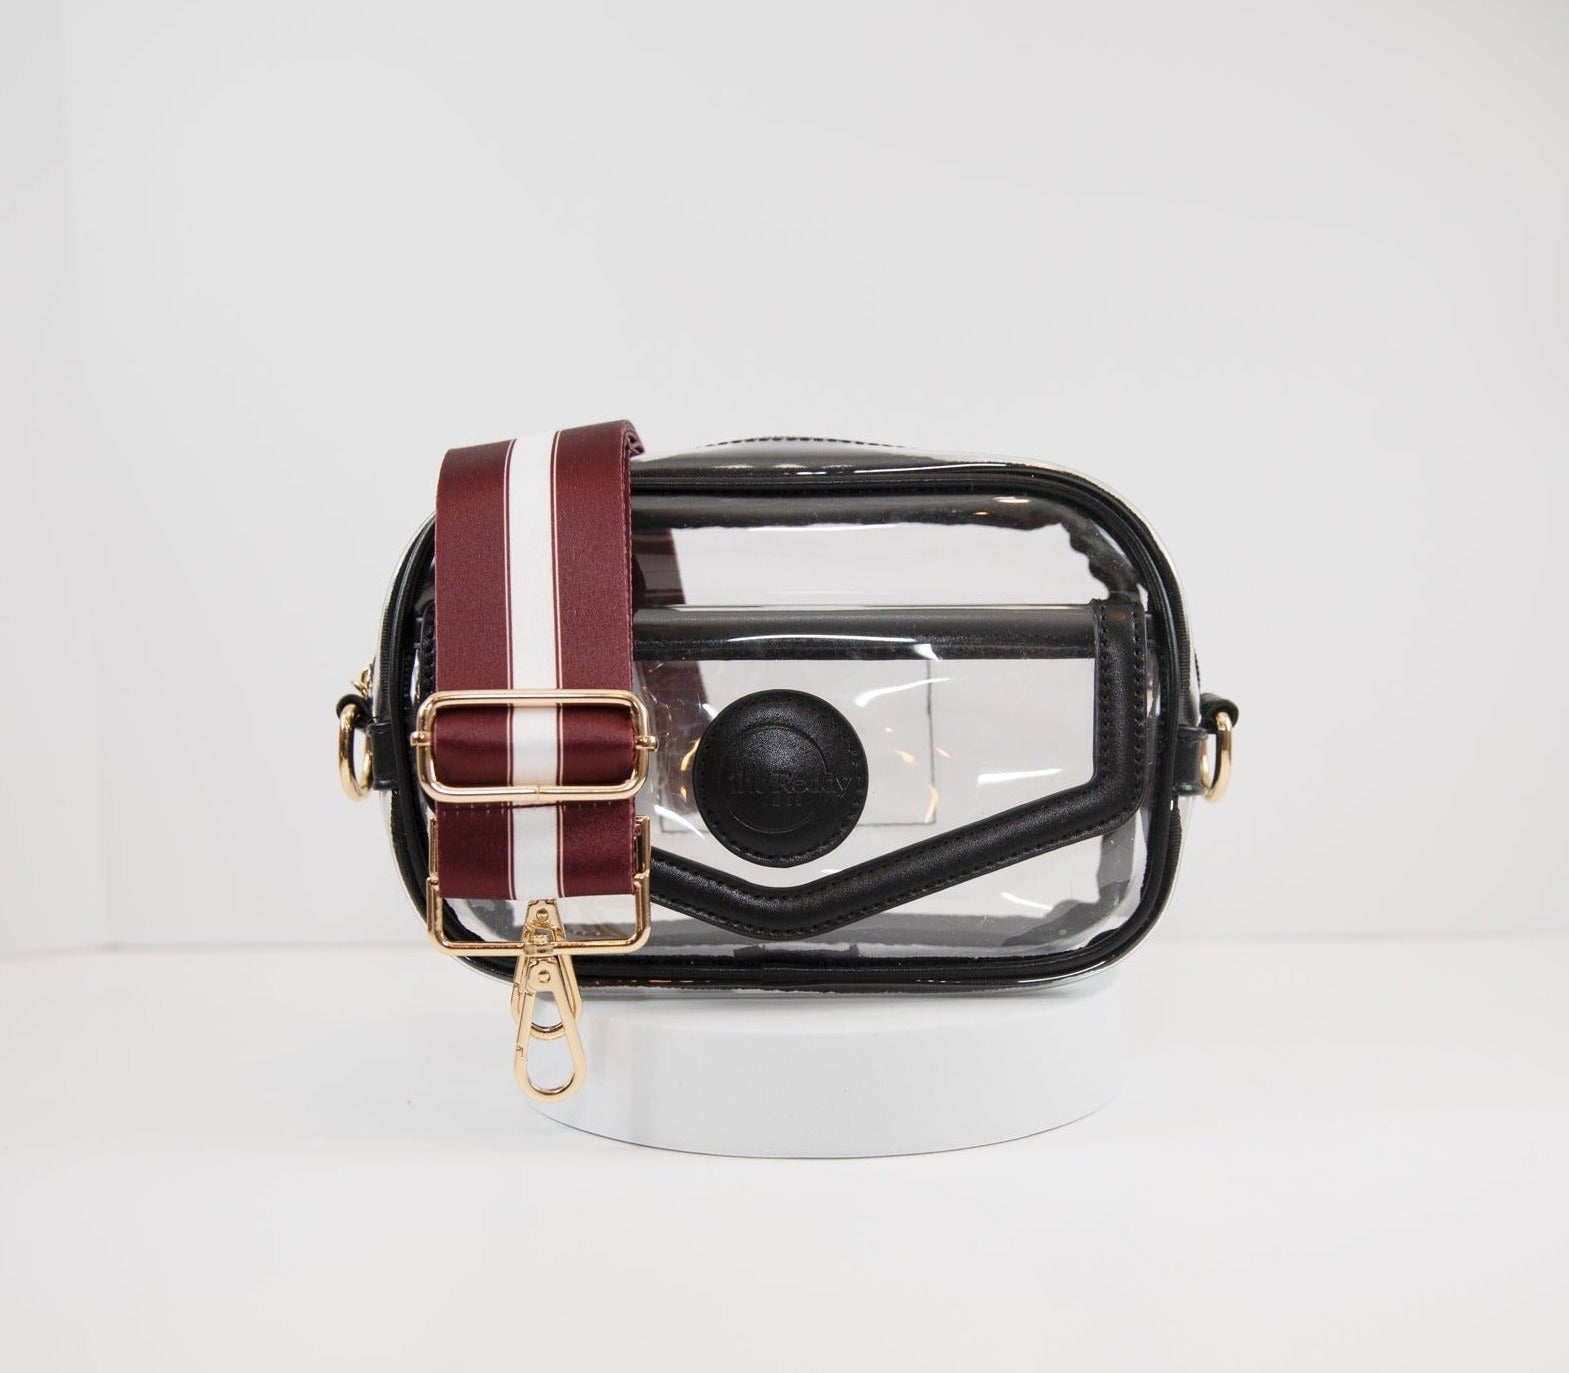 Clear stadium bag in black leather trim, front facing, with a crossbody strap in the team colors of Texas A&M.